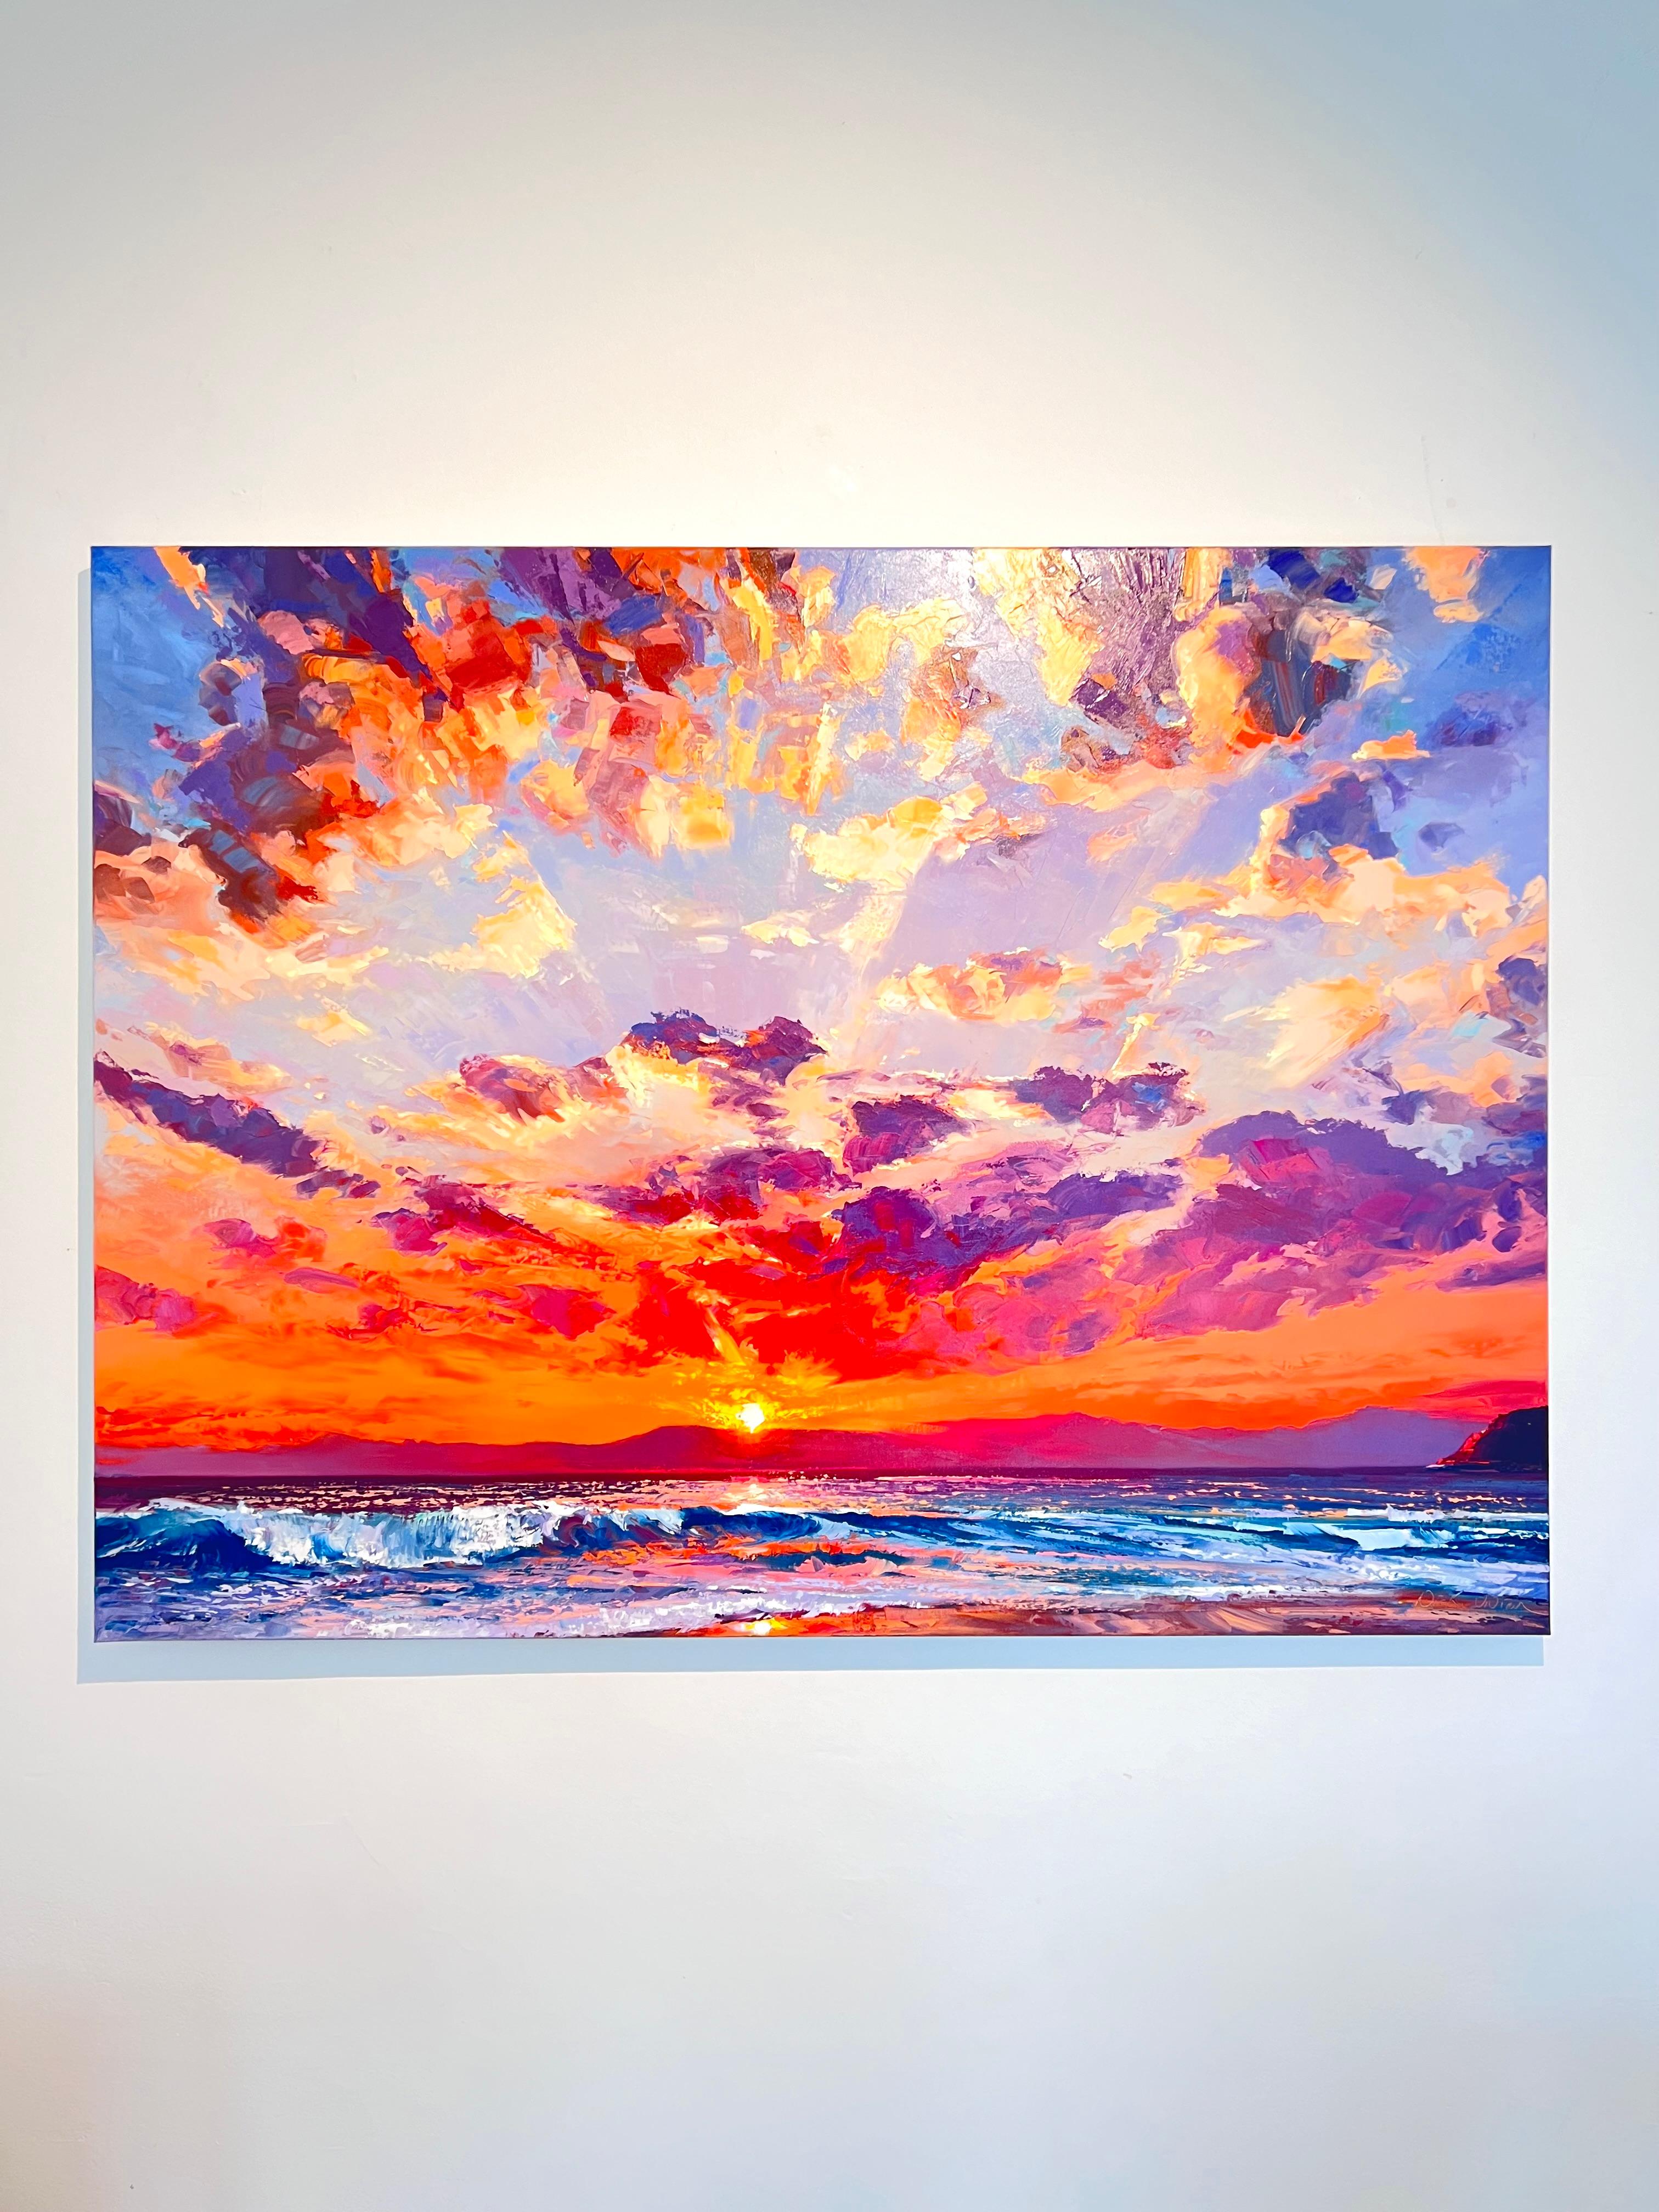 Promise of a New Day - modern art impressionist seascape vivid -contemporary art - Abstract Impressionist Art by Nicholas Vivian